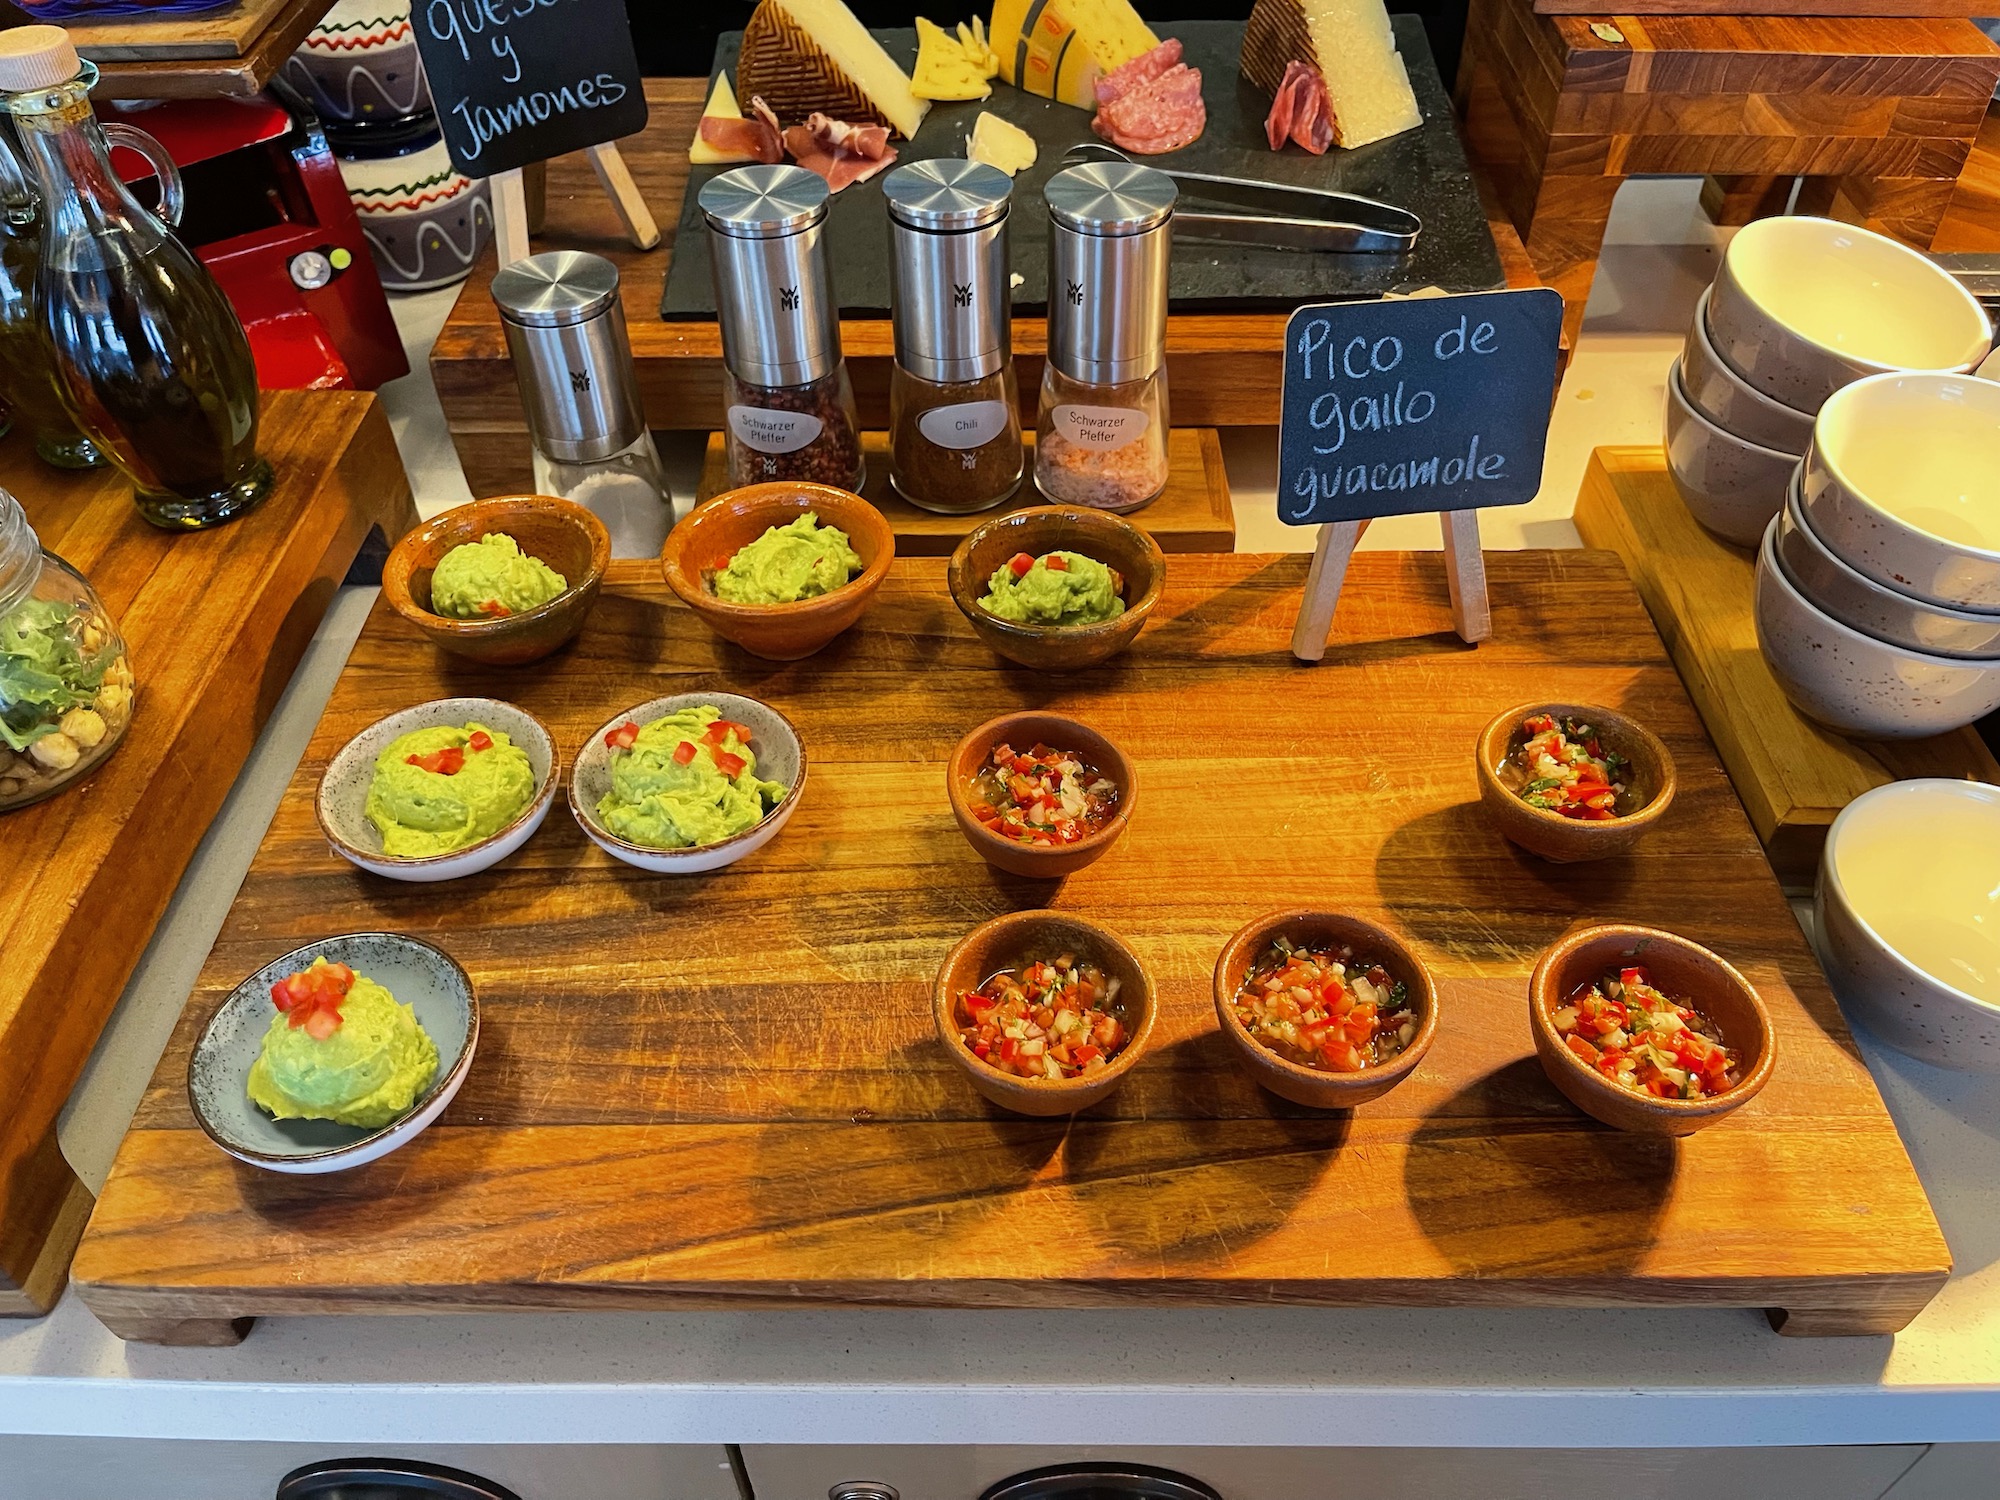 a table with bowls of guacamole and other food items